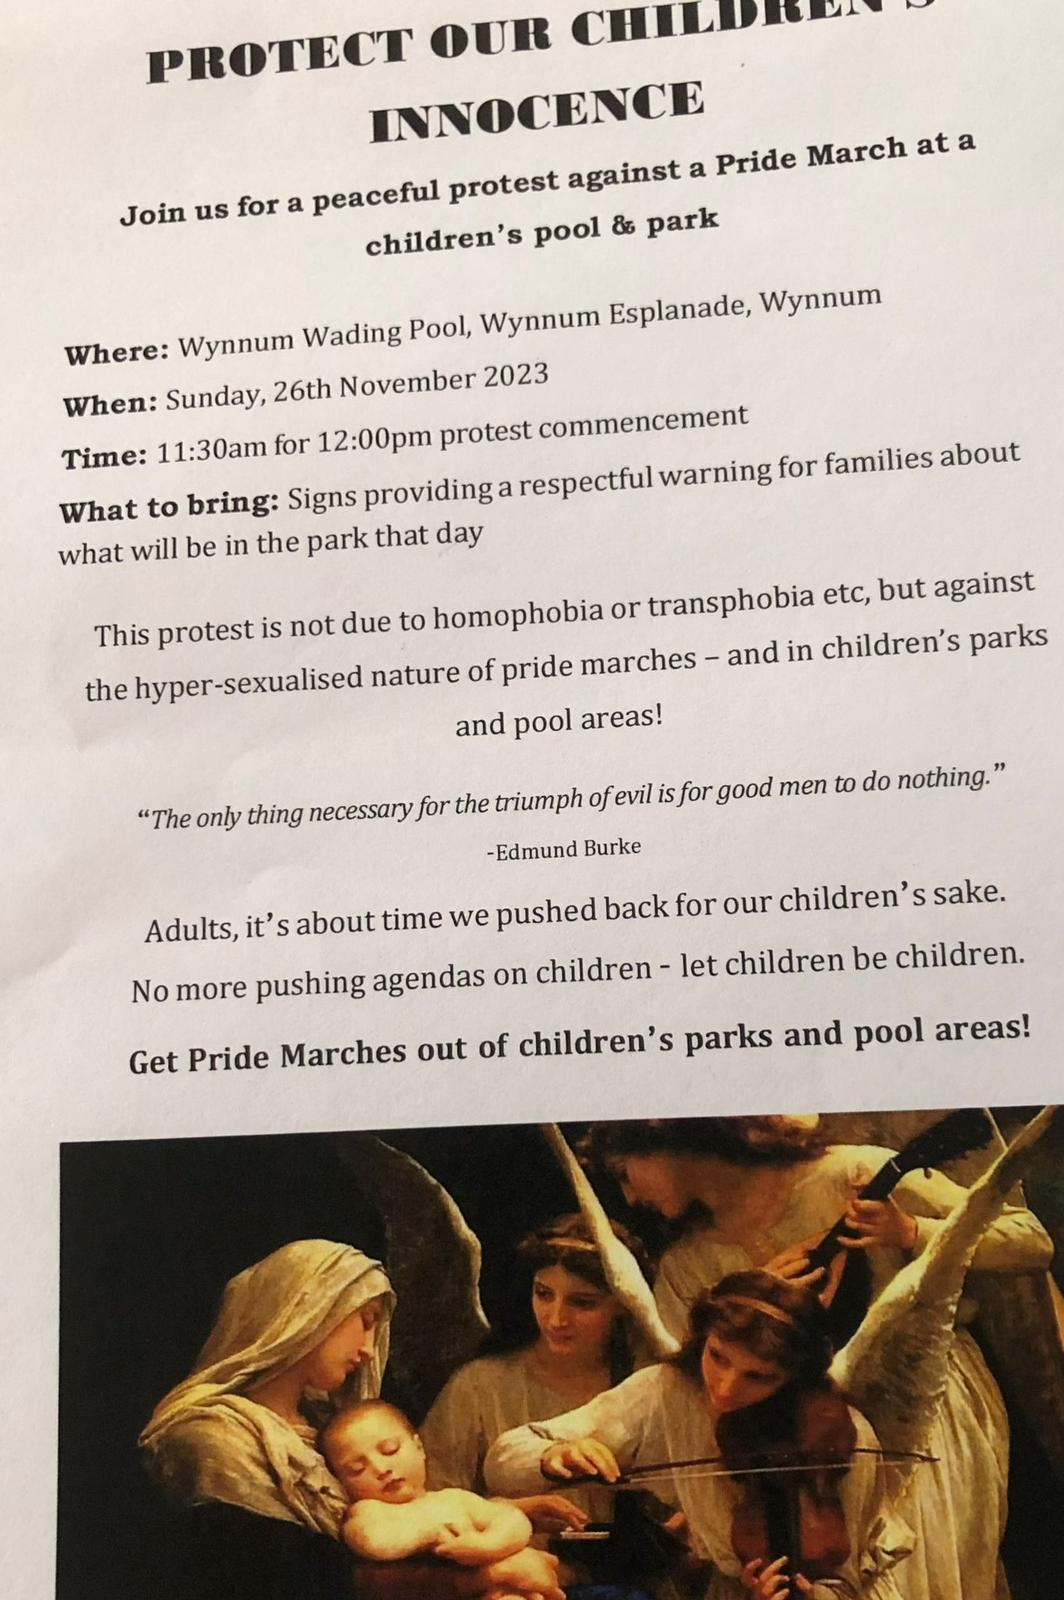 a text-heavy flyer featuring religious imagery calling on people to protest against a pride march in wynnum